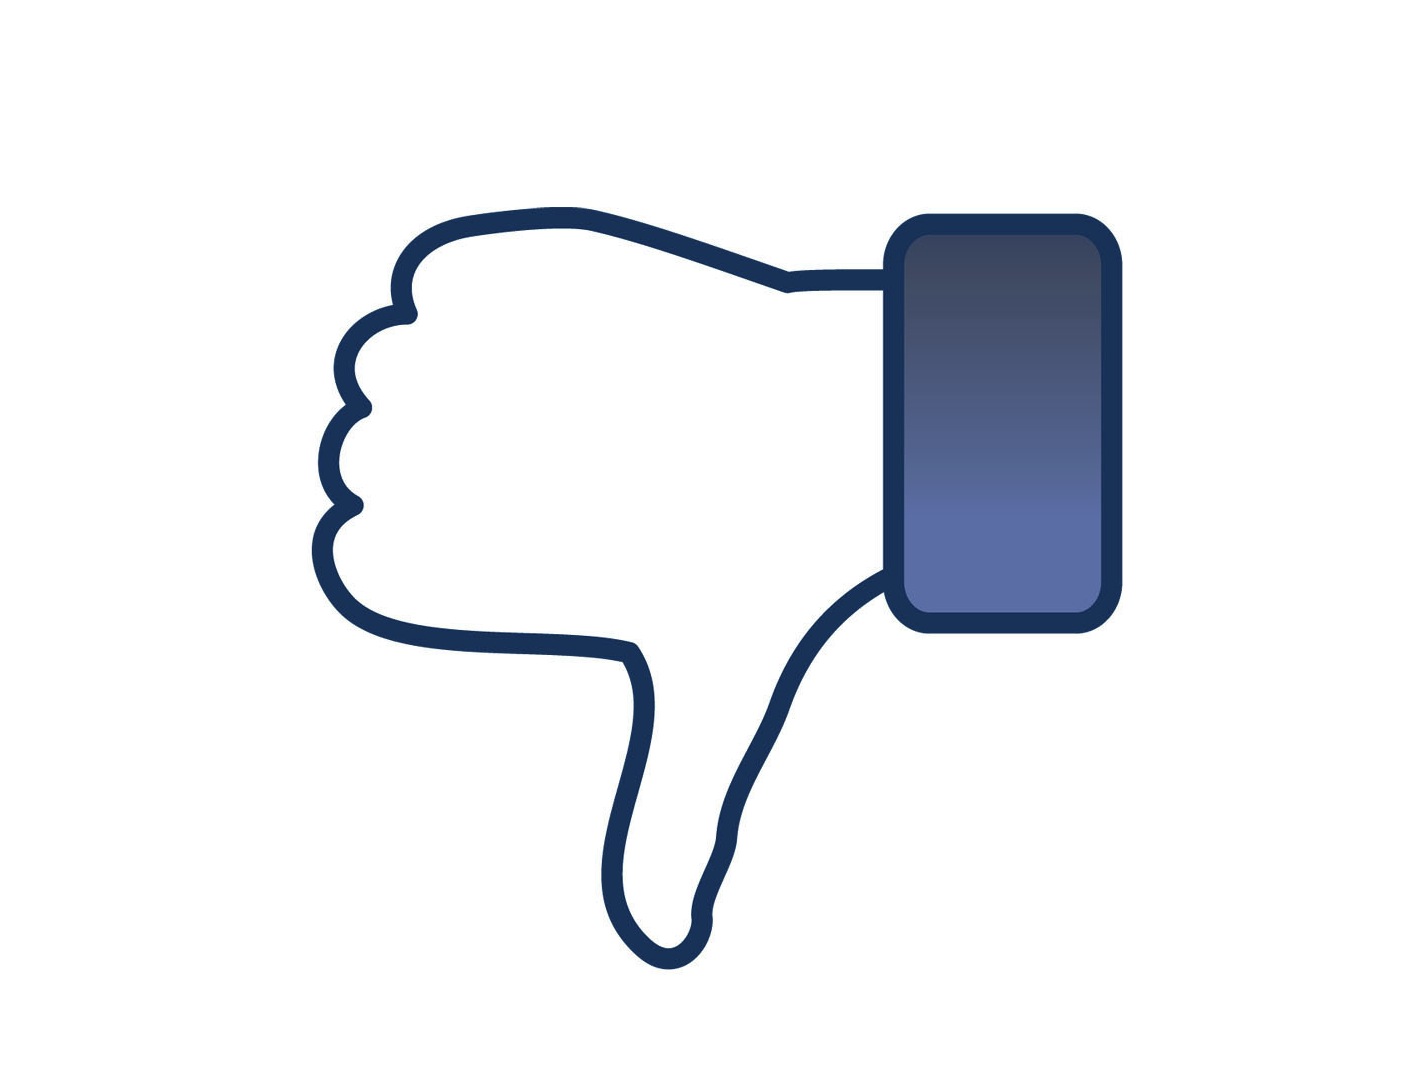 Facebook Thumbs Up Image - ClipArt Best